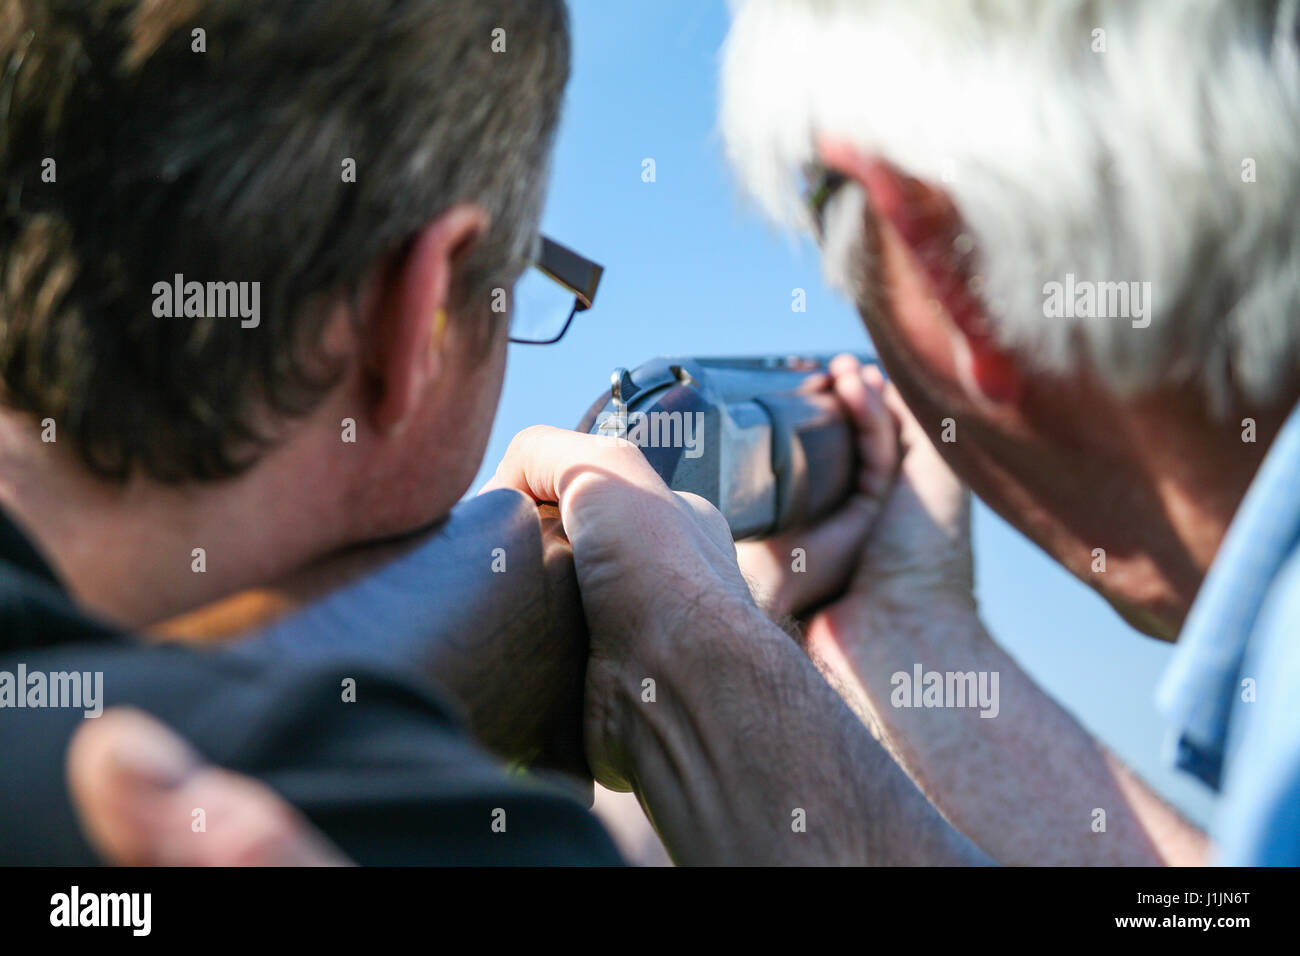 One man coaches another at clay pigeon shooting range Stock Photo